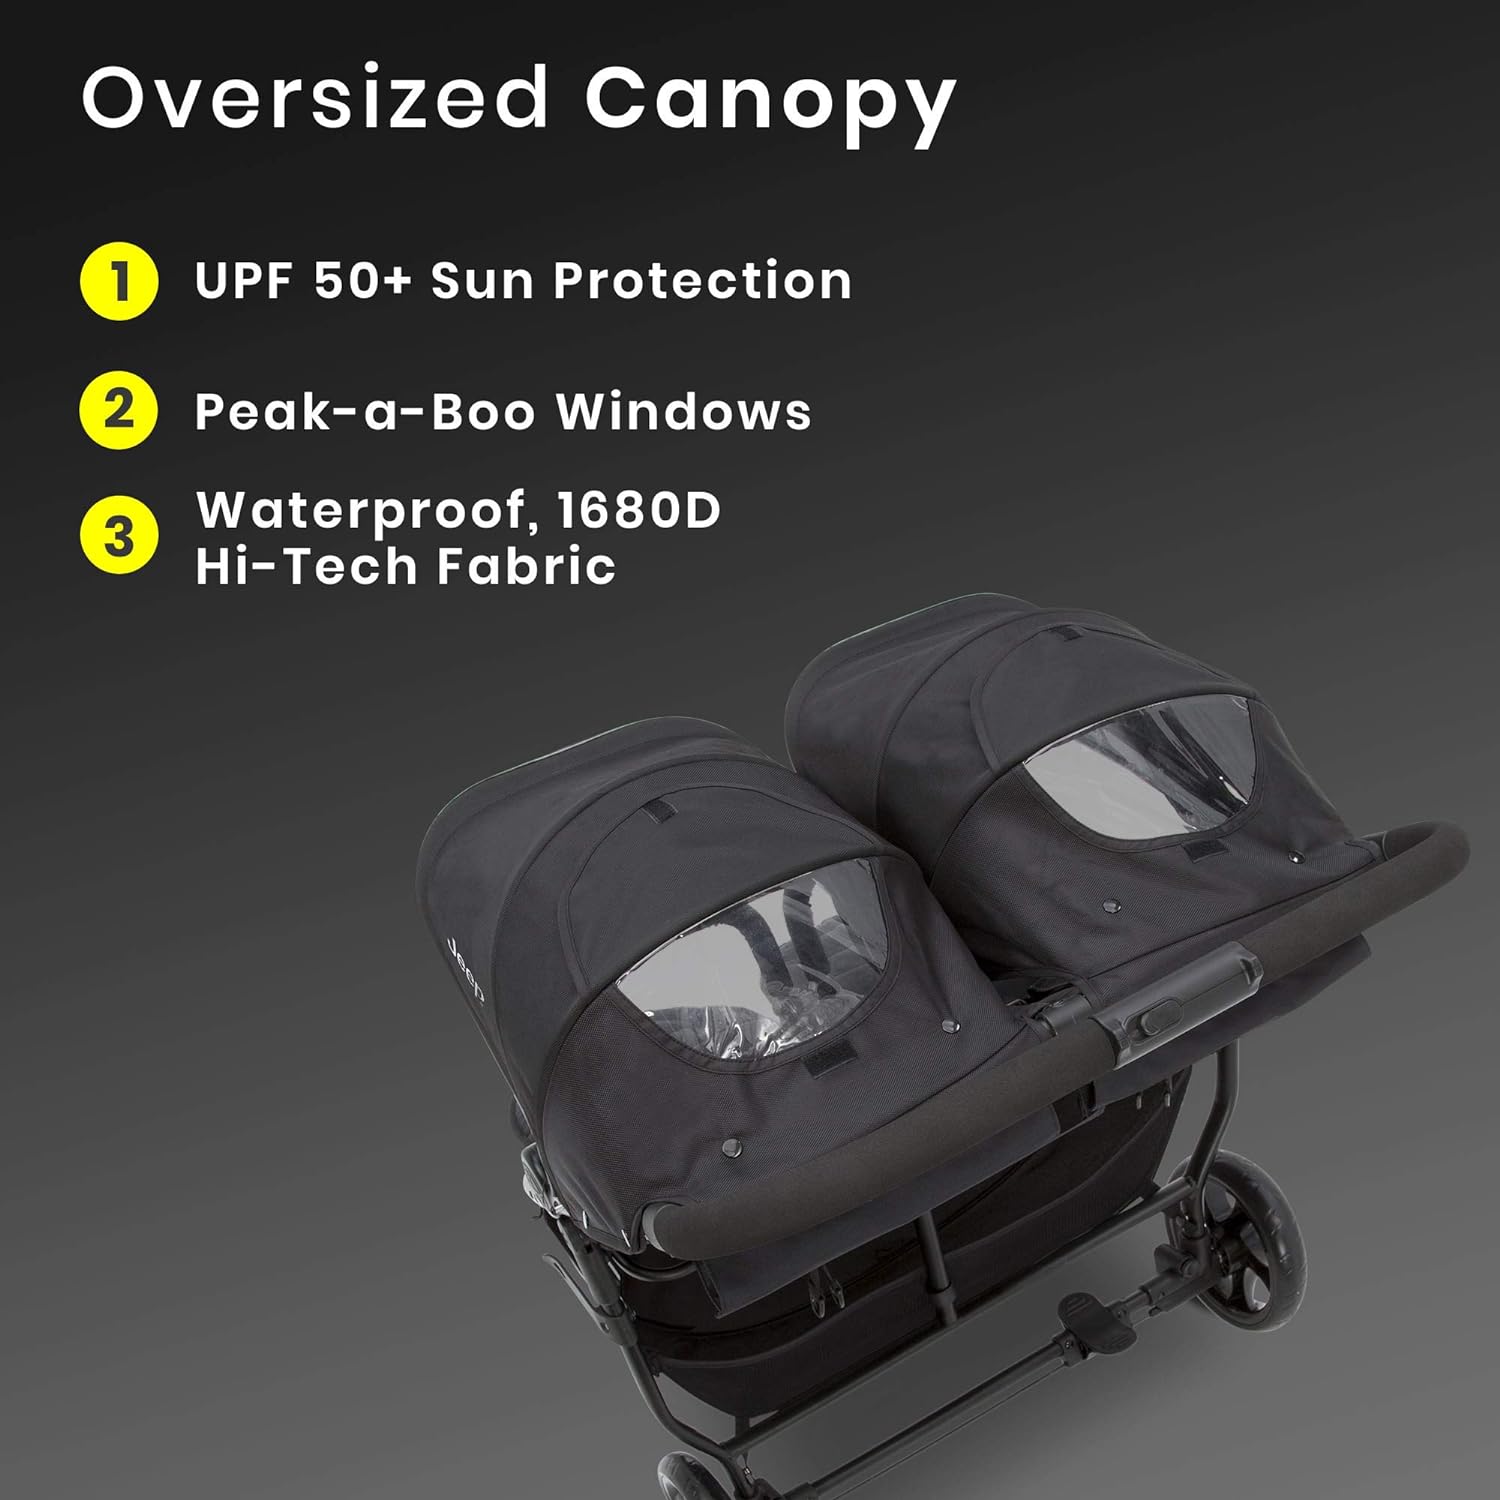 Jeep Destination Ultralight Side x Side Double Stroller, Midnight - Jeep Destination Ultralight Double Stroller Review